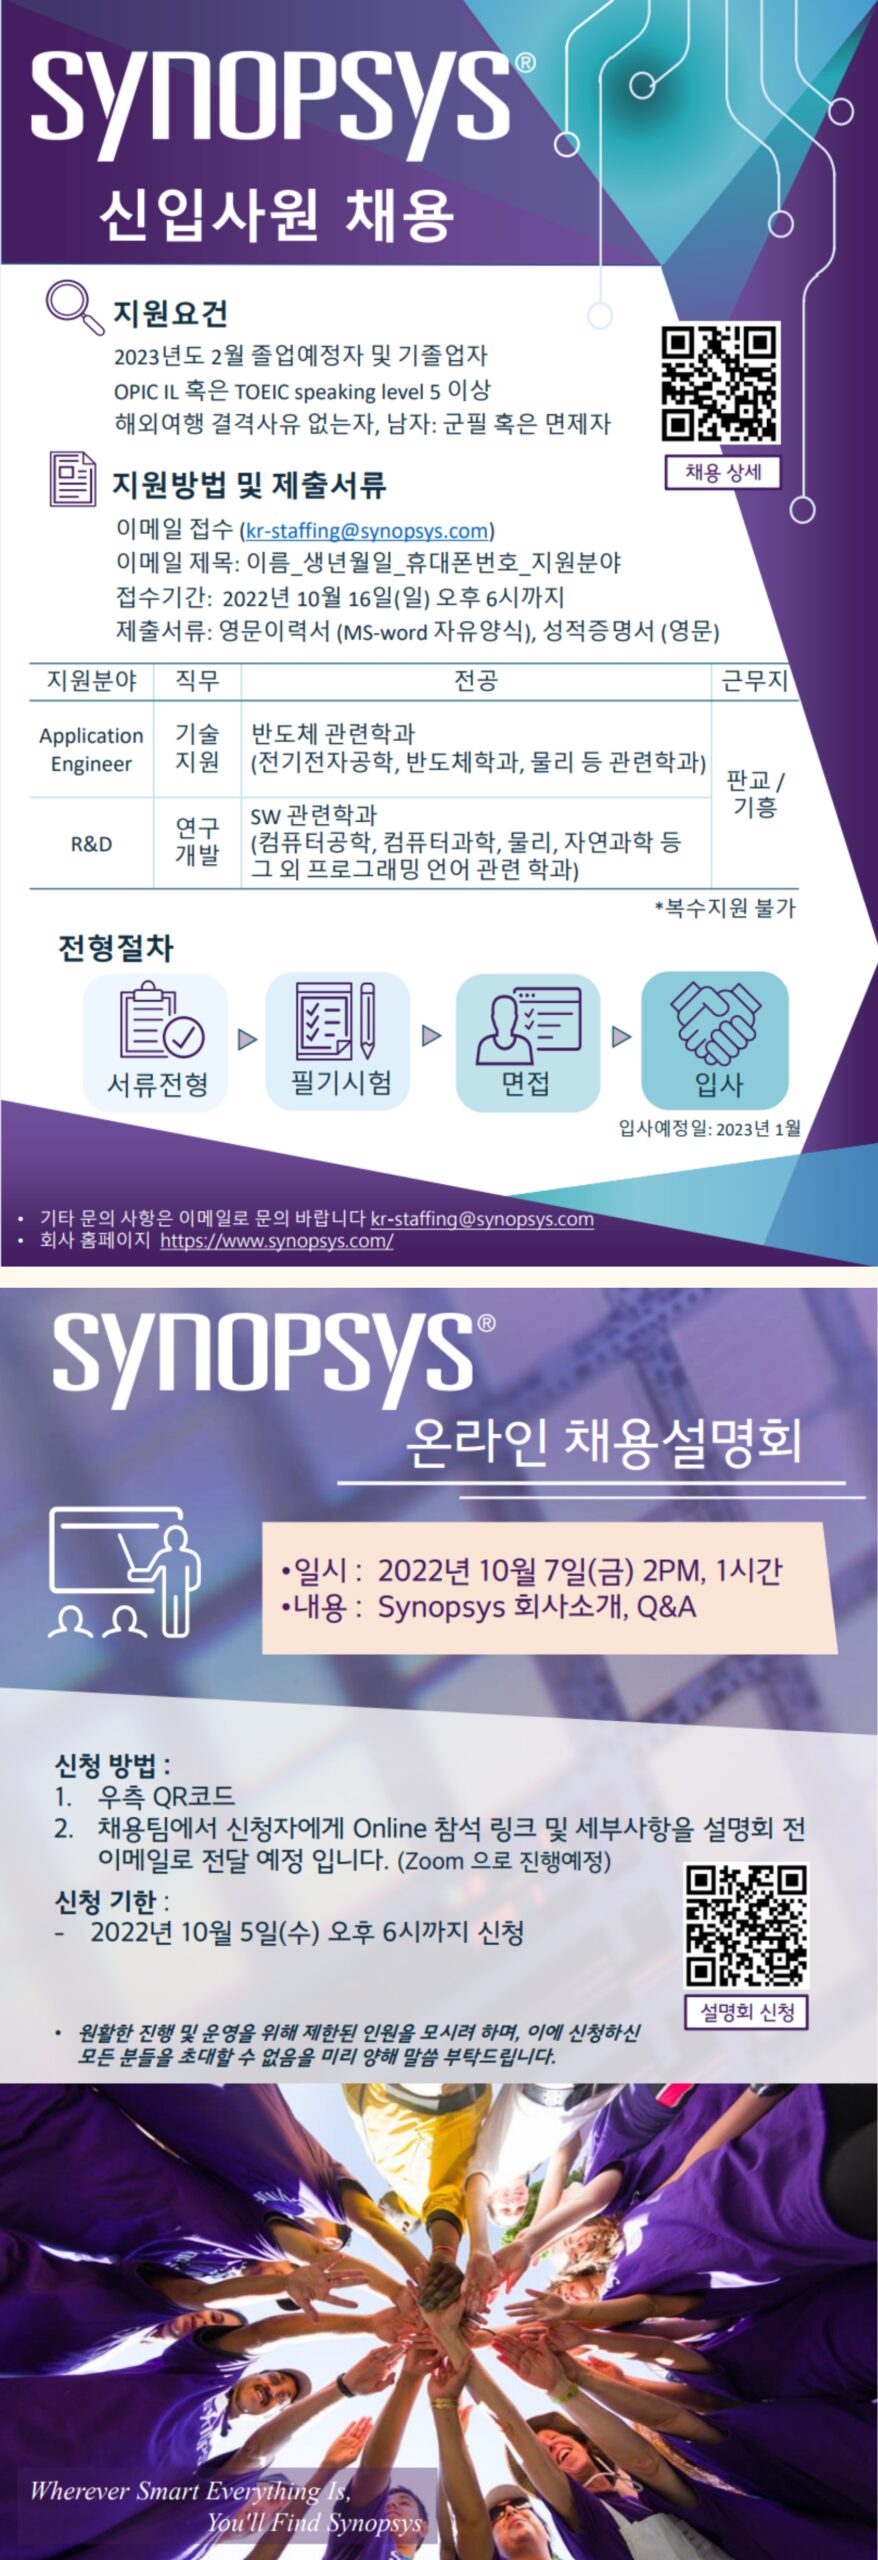 synopsys poster scaled